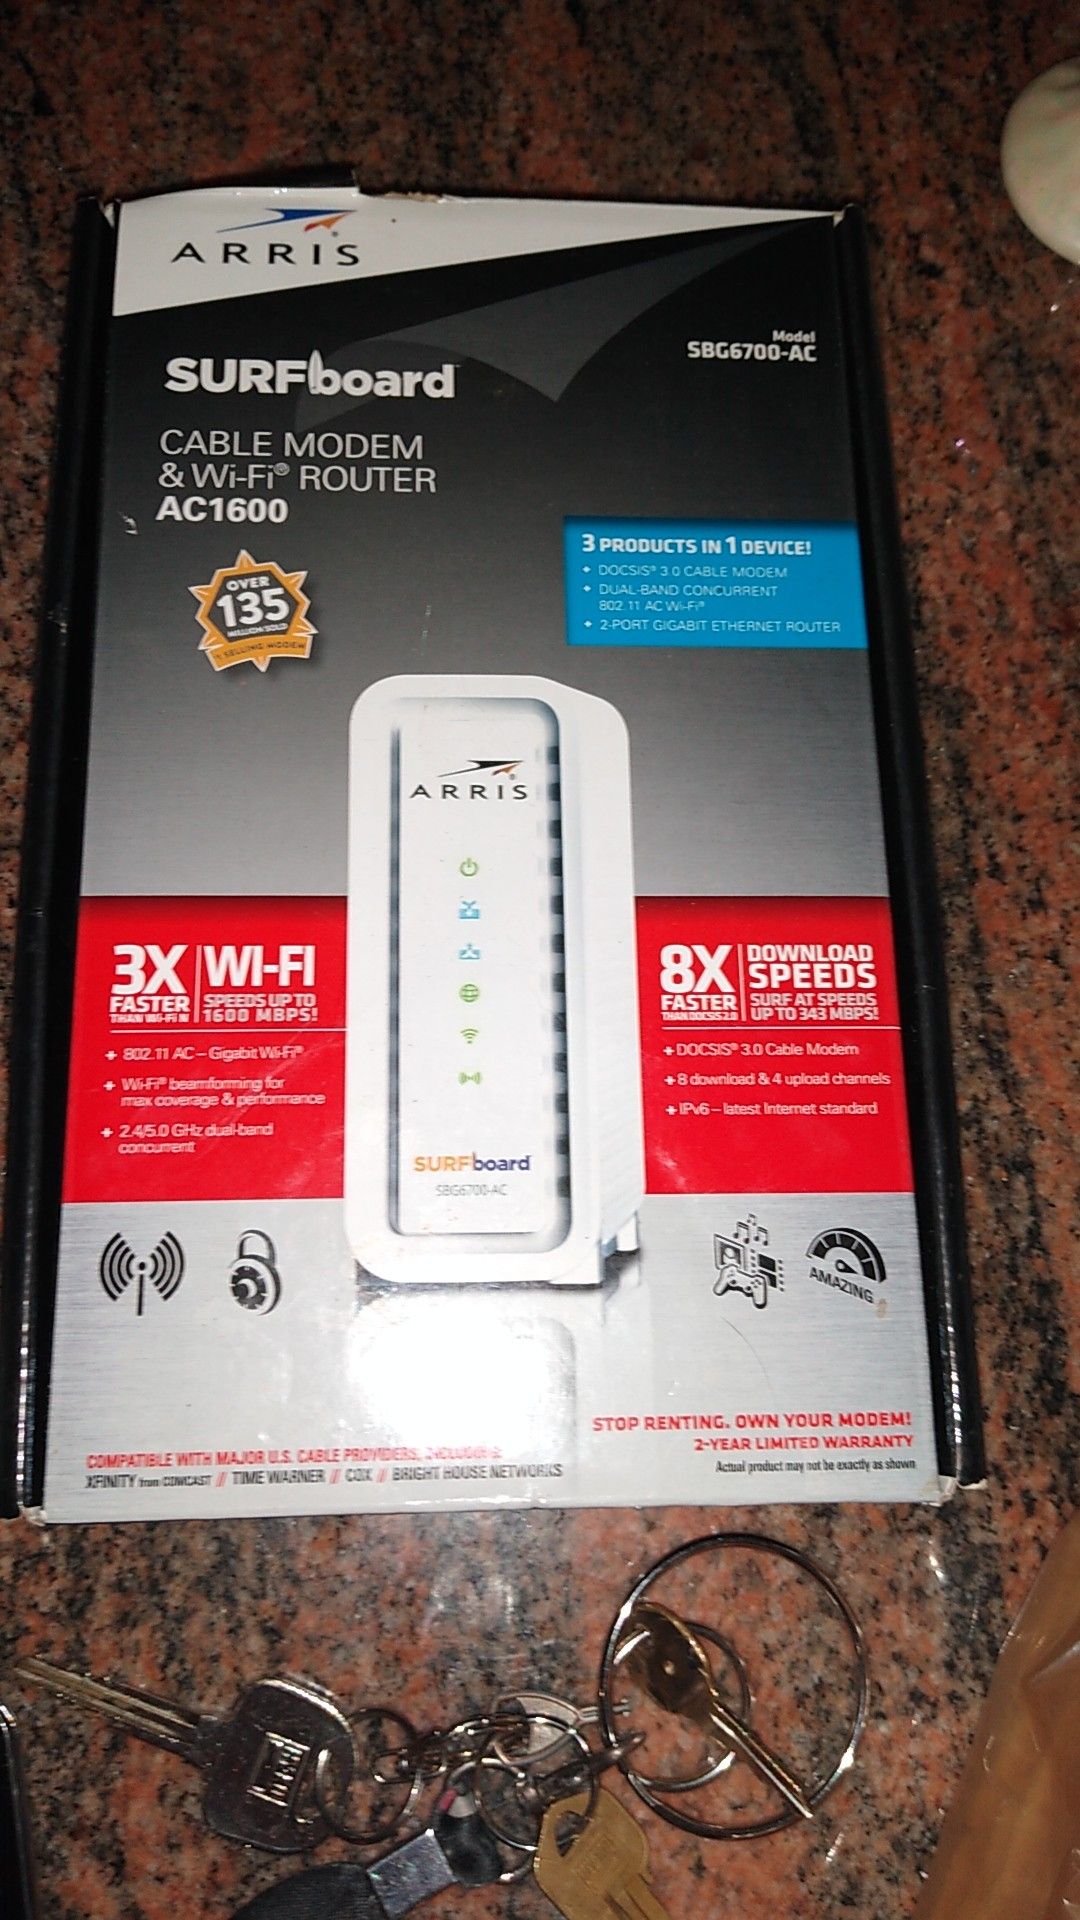 Arris cable modem and Wi-Fi router